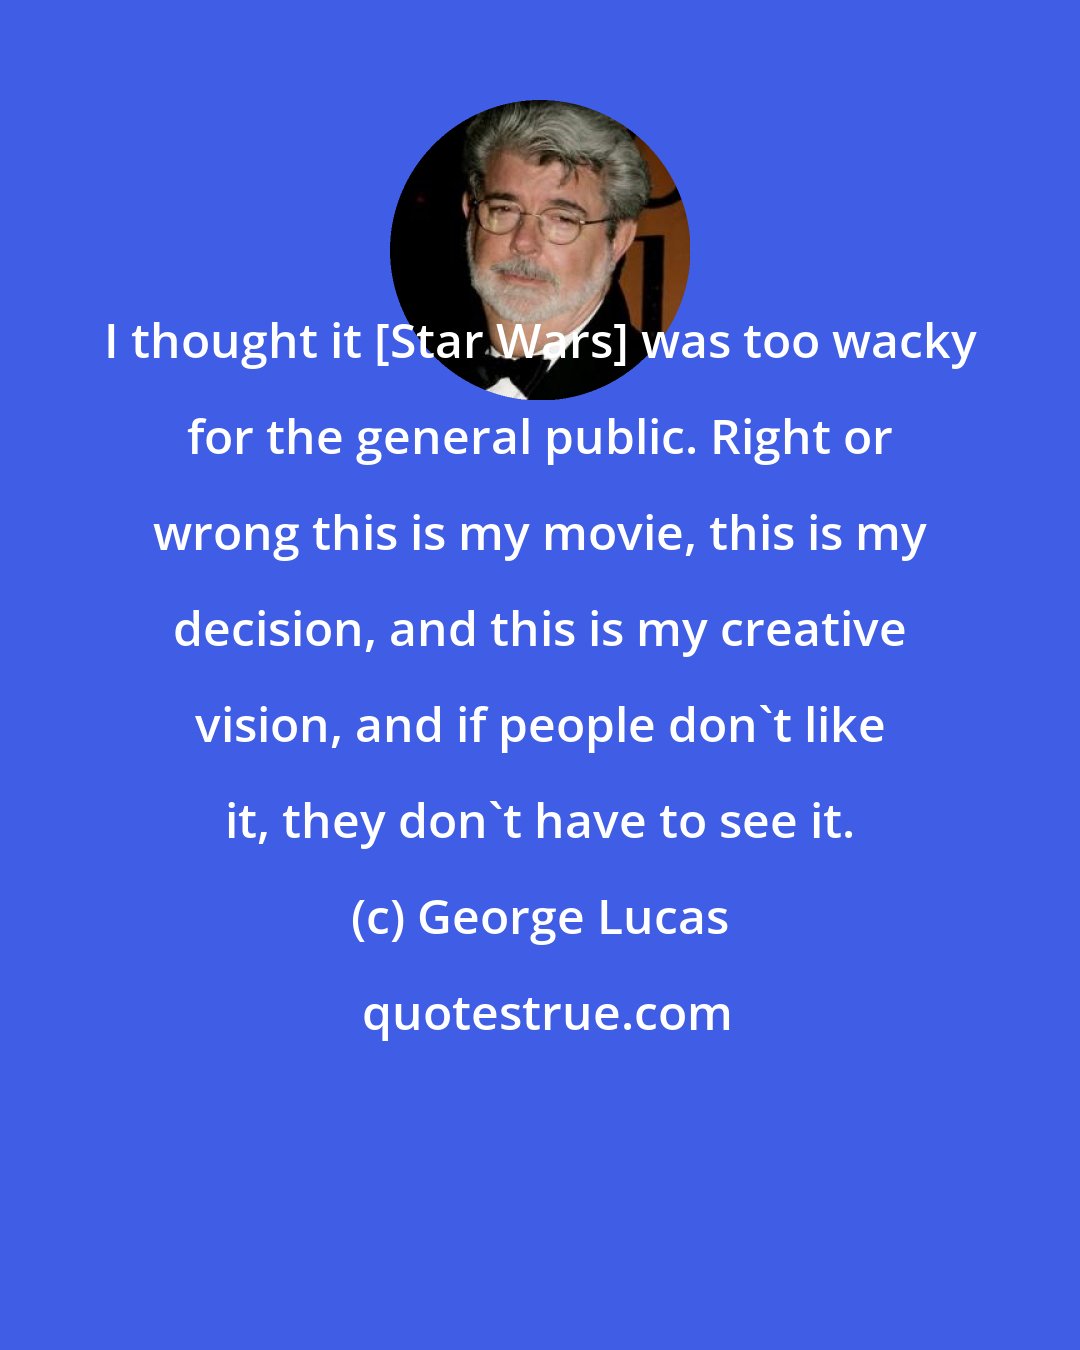 George Lucas: I thought it [Star Wars] was too wacky for the general public. Right or wrong this is my movie, this is my decision, and this is my creative vision, and if people don't like it, they don't have to see it.